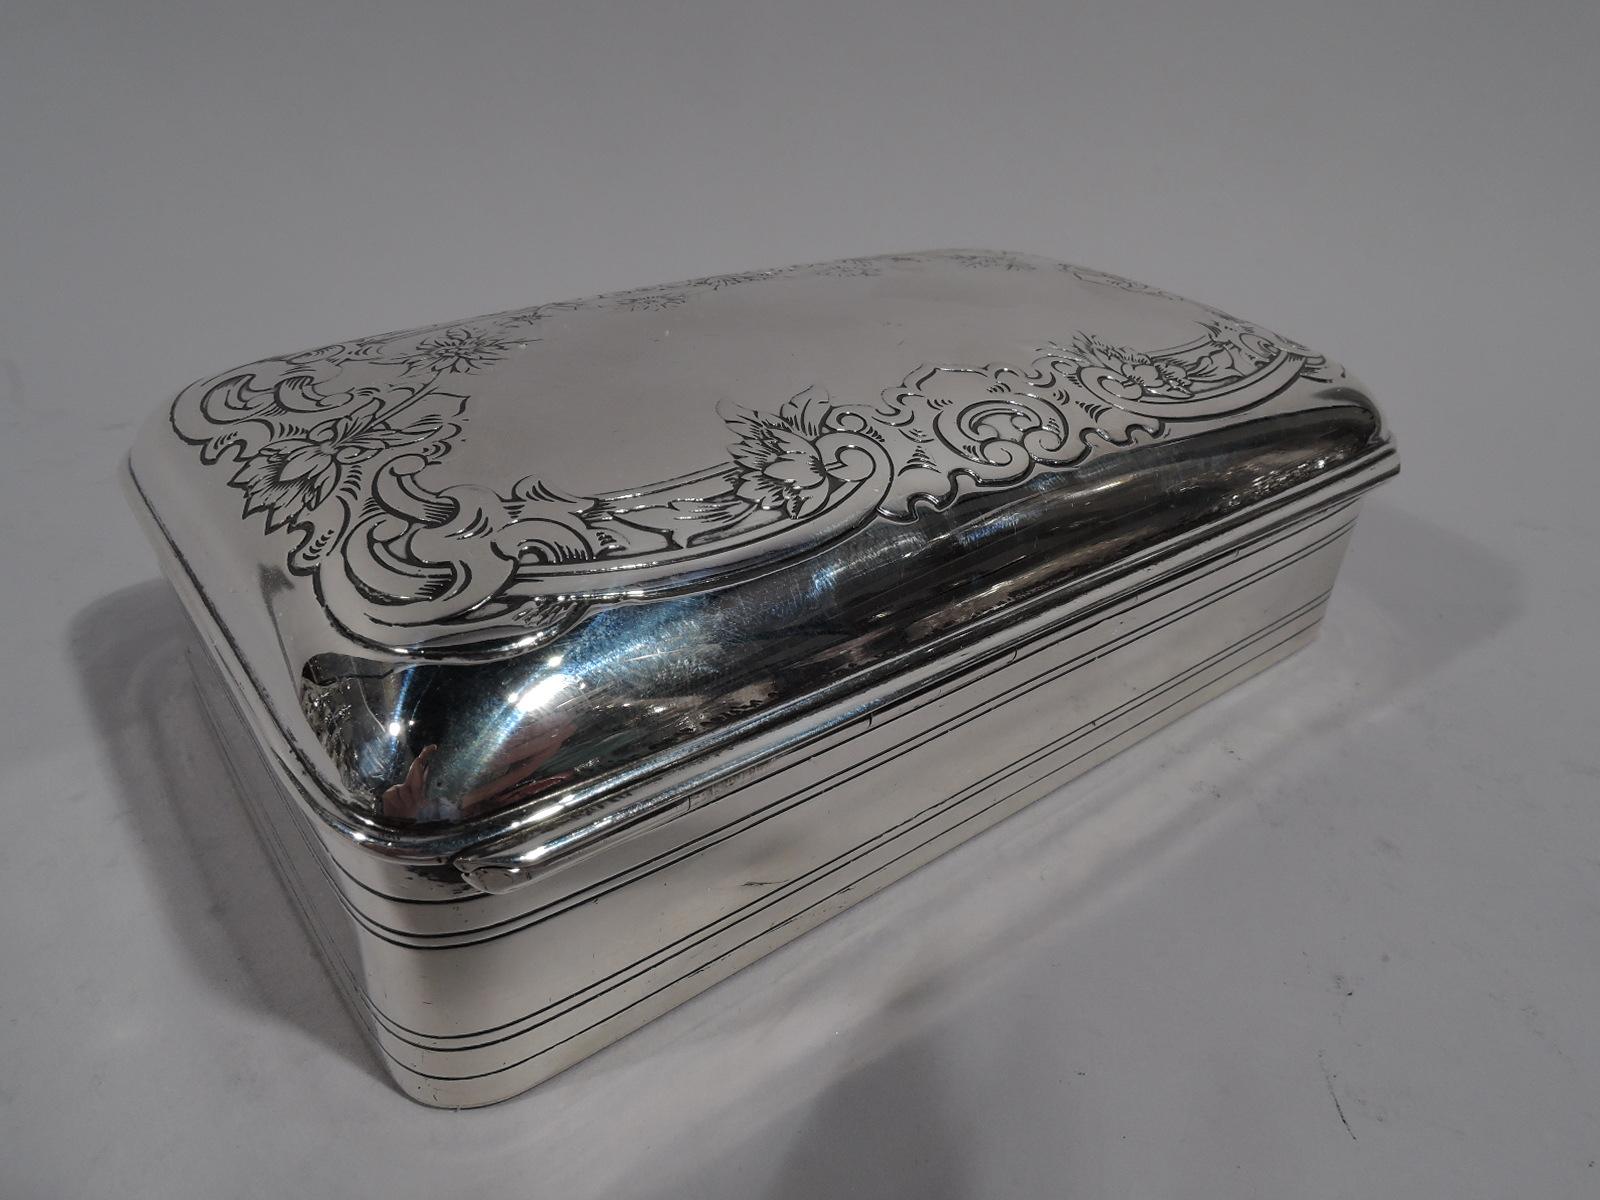 North American Antique Gorham Edwardian Classical Sterling Silver Jewelry Box